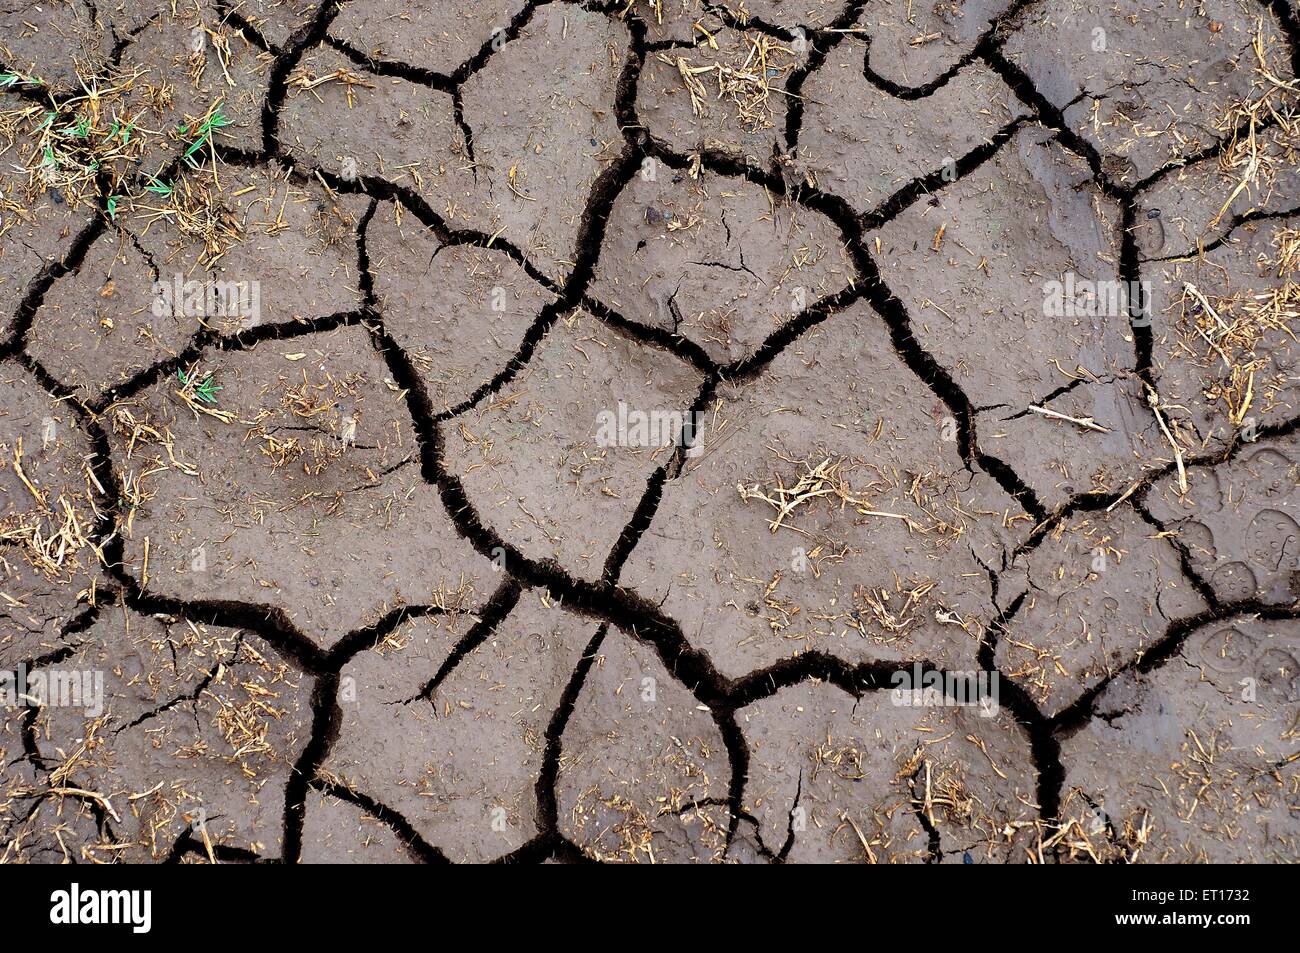 cracked earth, drought, dry earth, dried earth Stock Photo